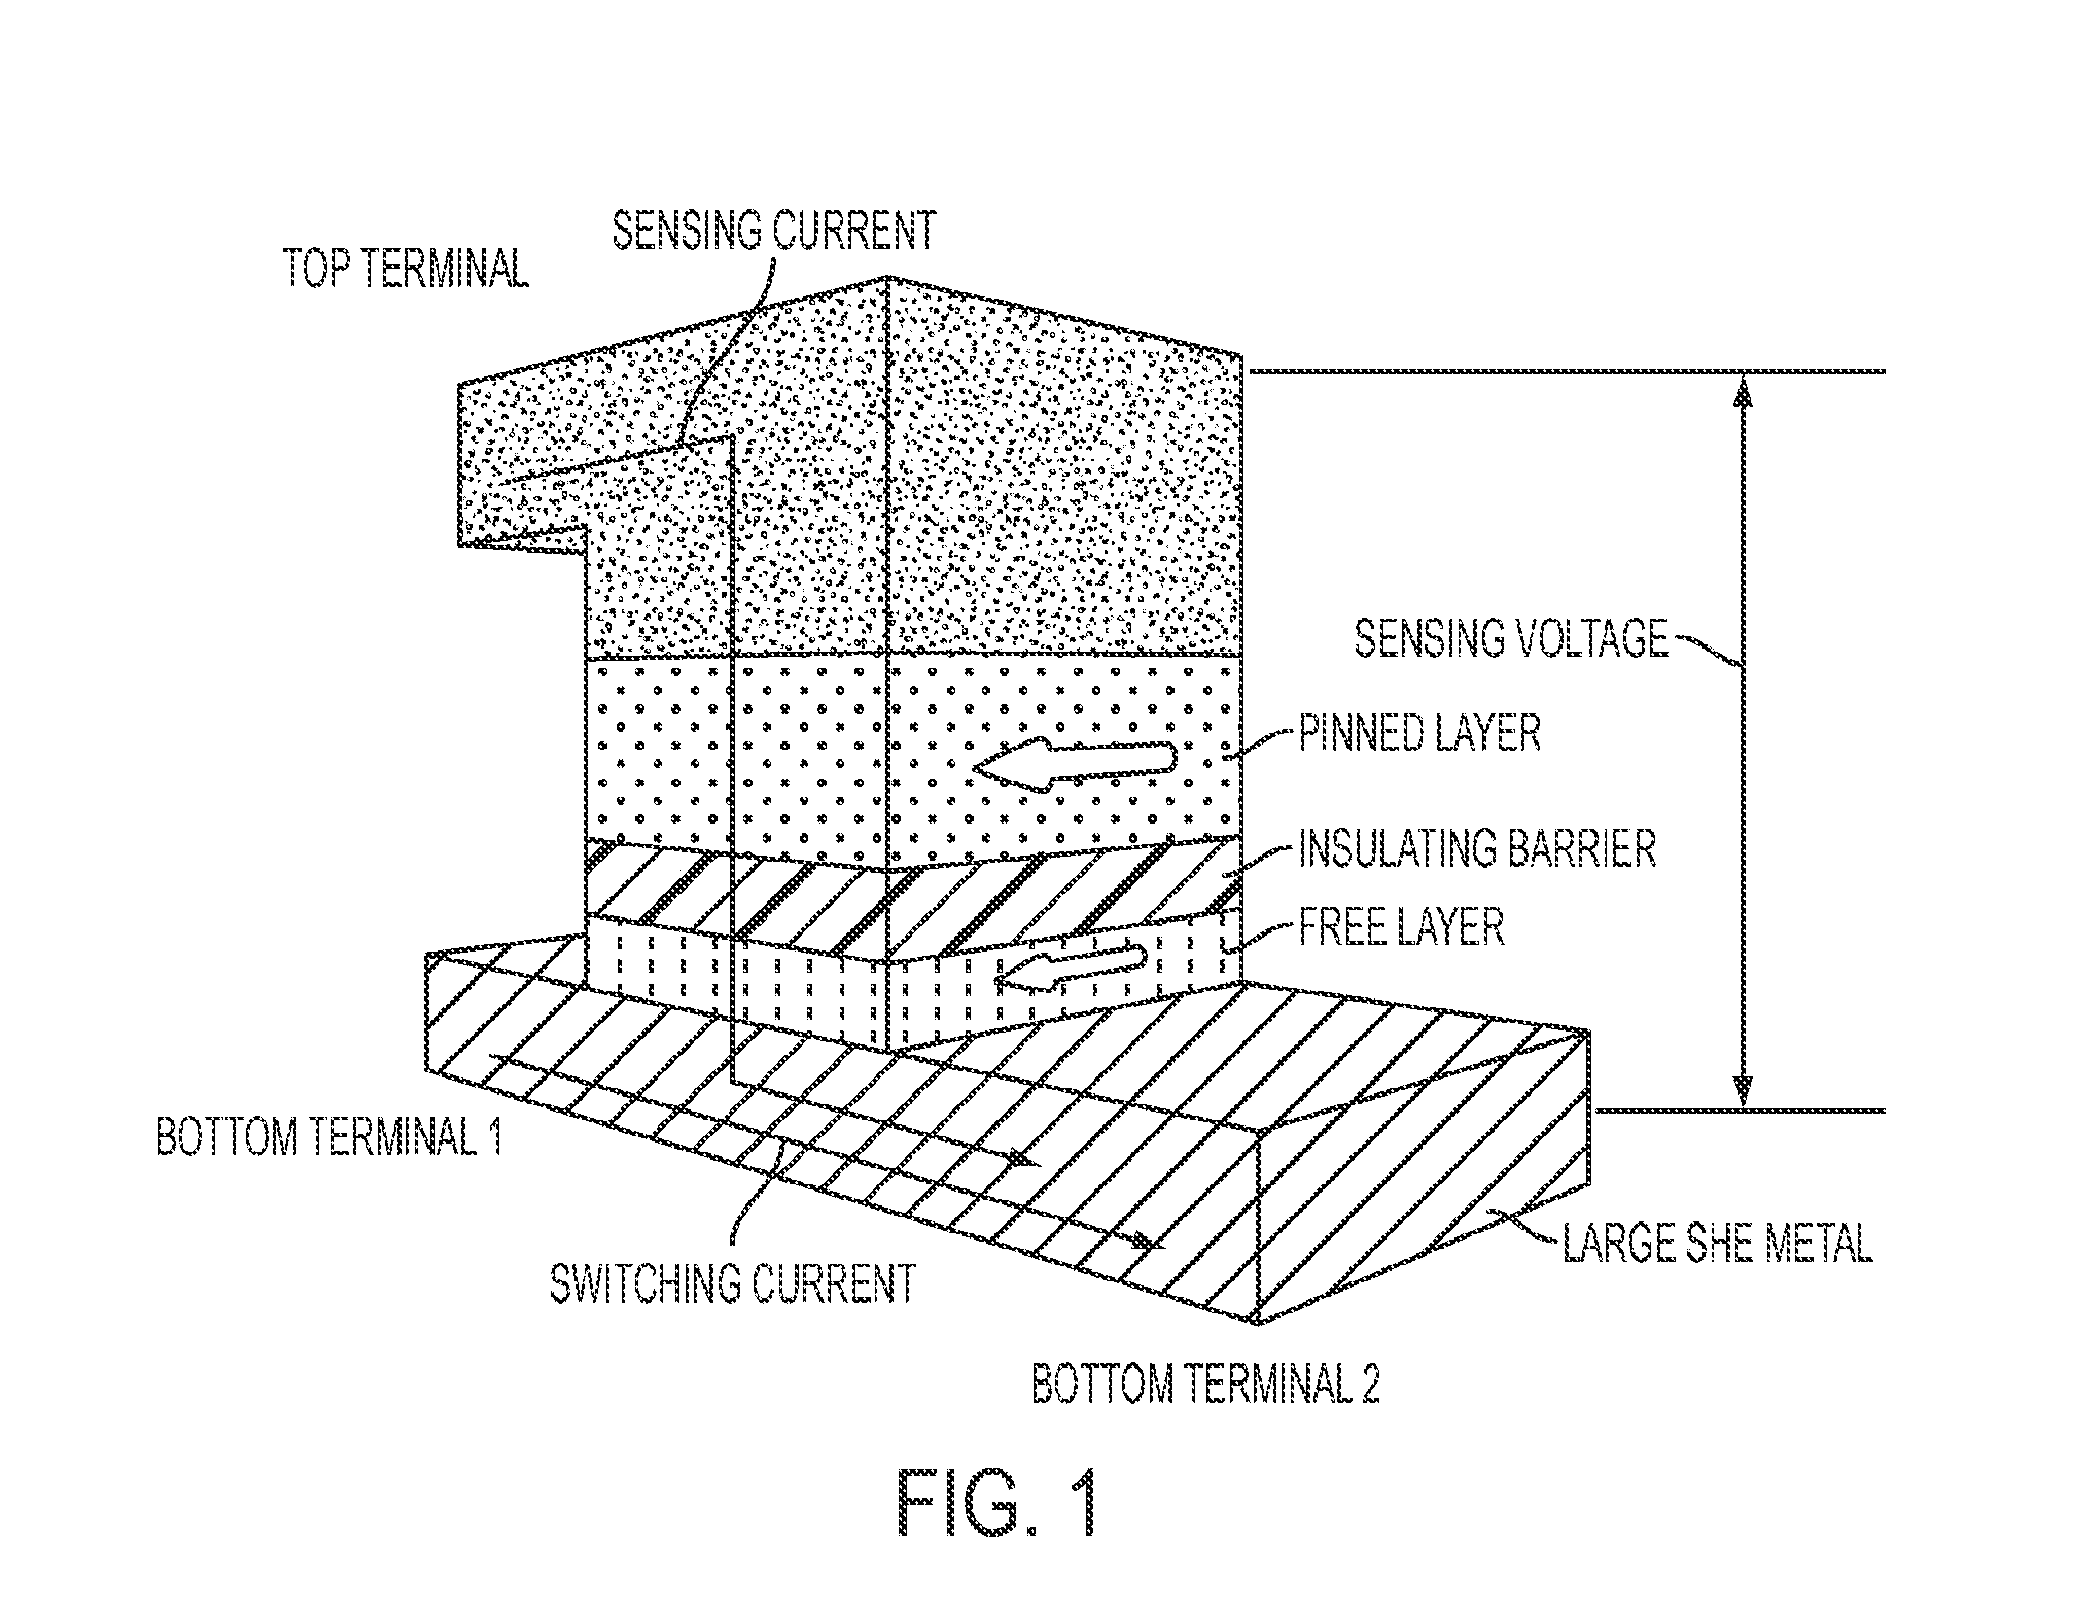 Spin hall effect magnetic apparatus, method and applications